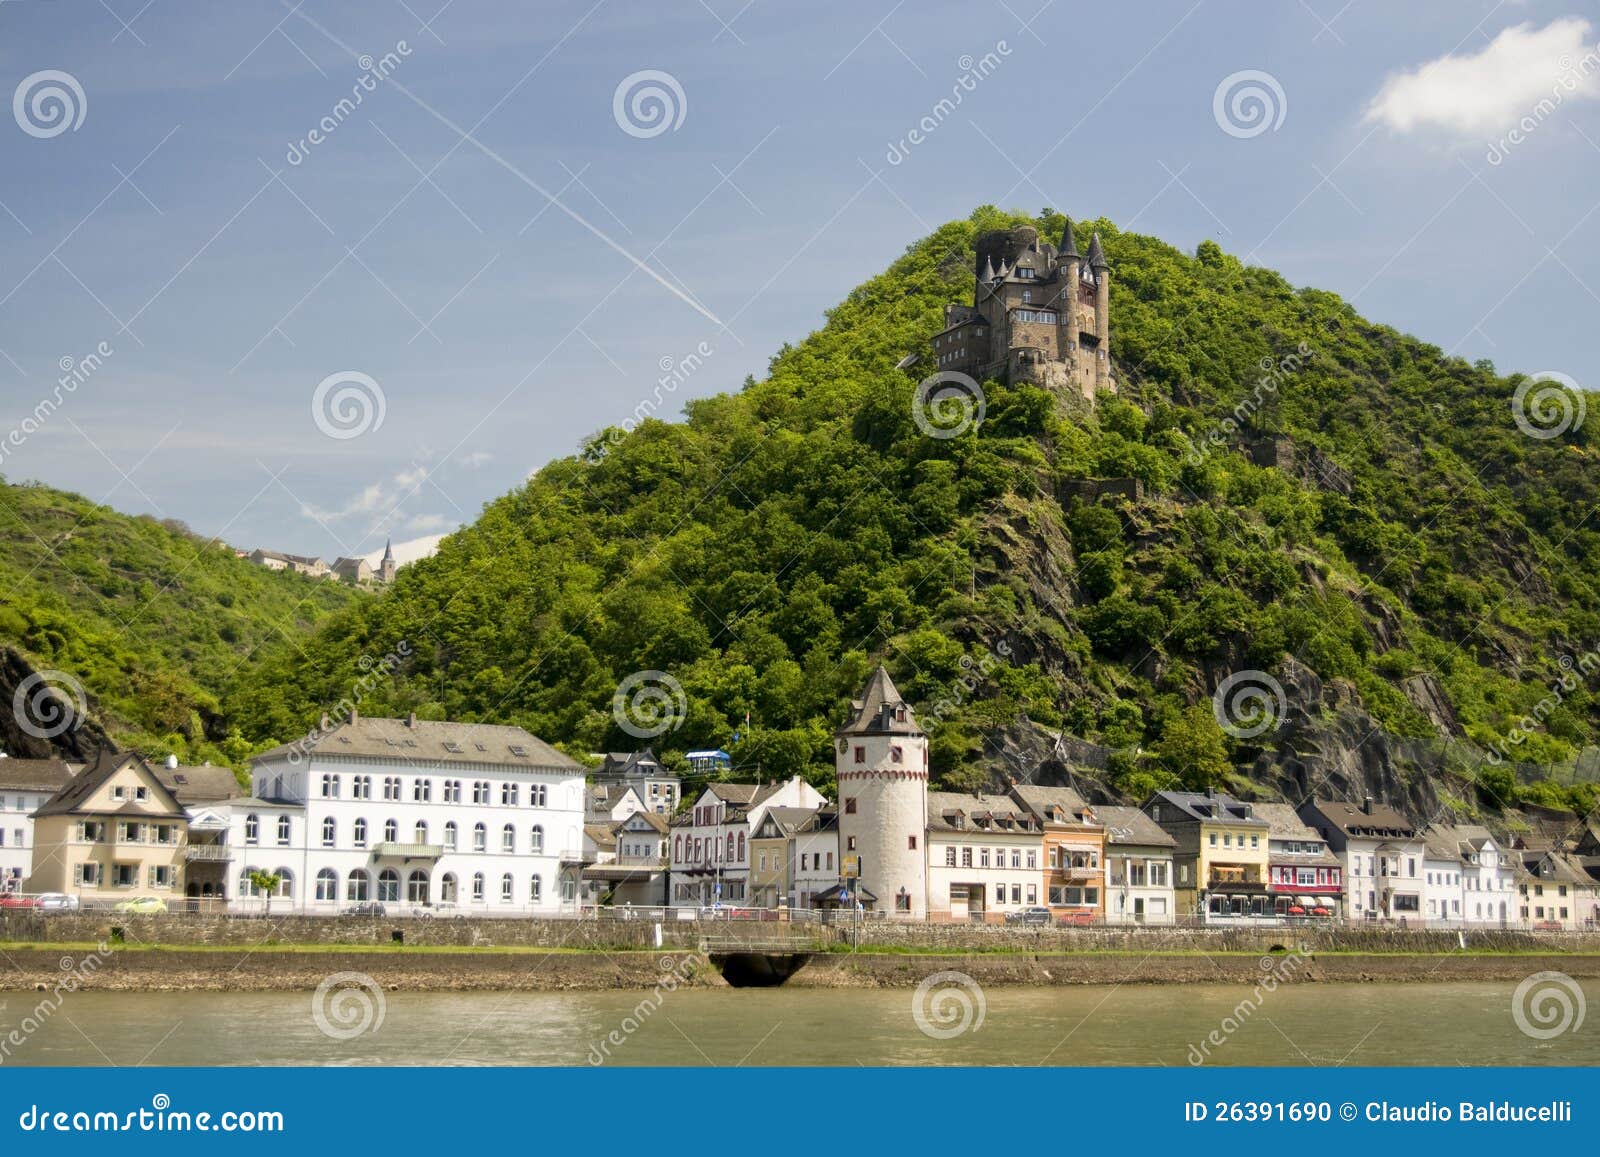 towns and castles along the rhine valley